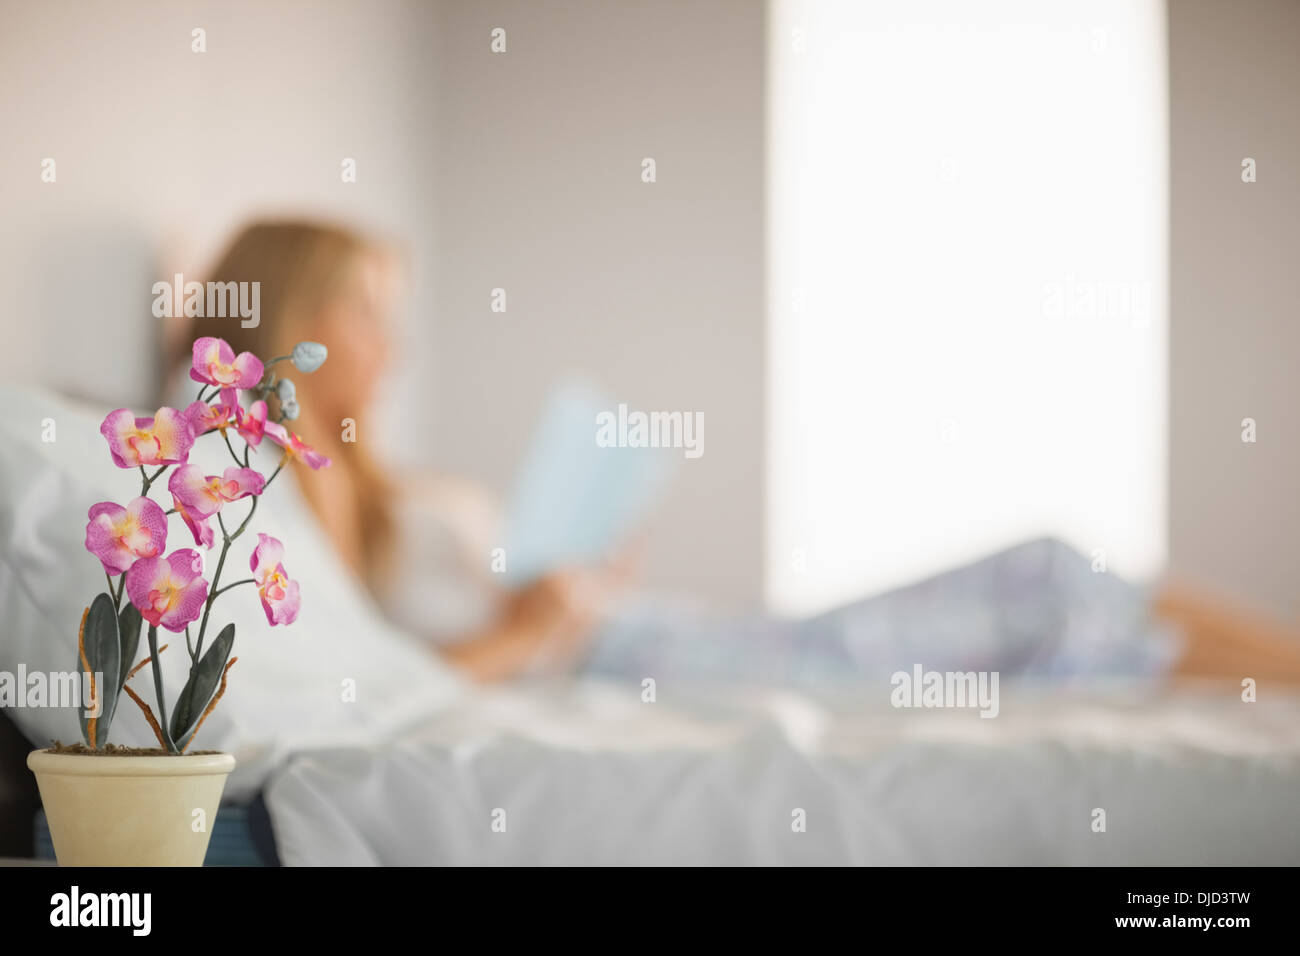 Focus on pink flower on bedside table Stock Photo